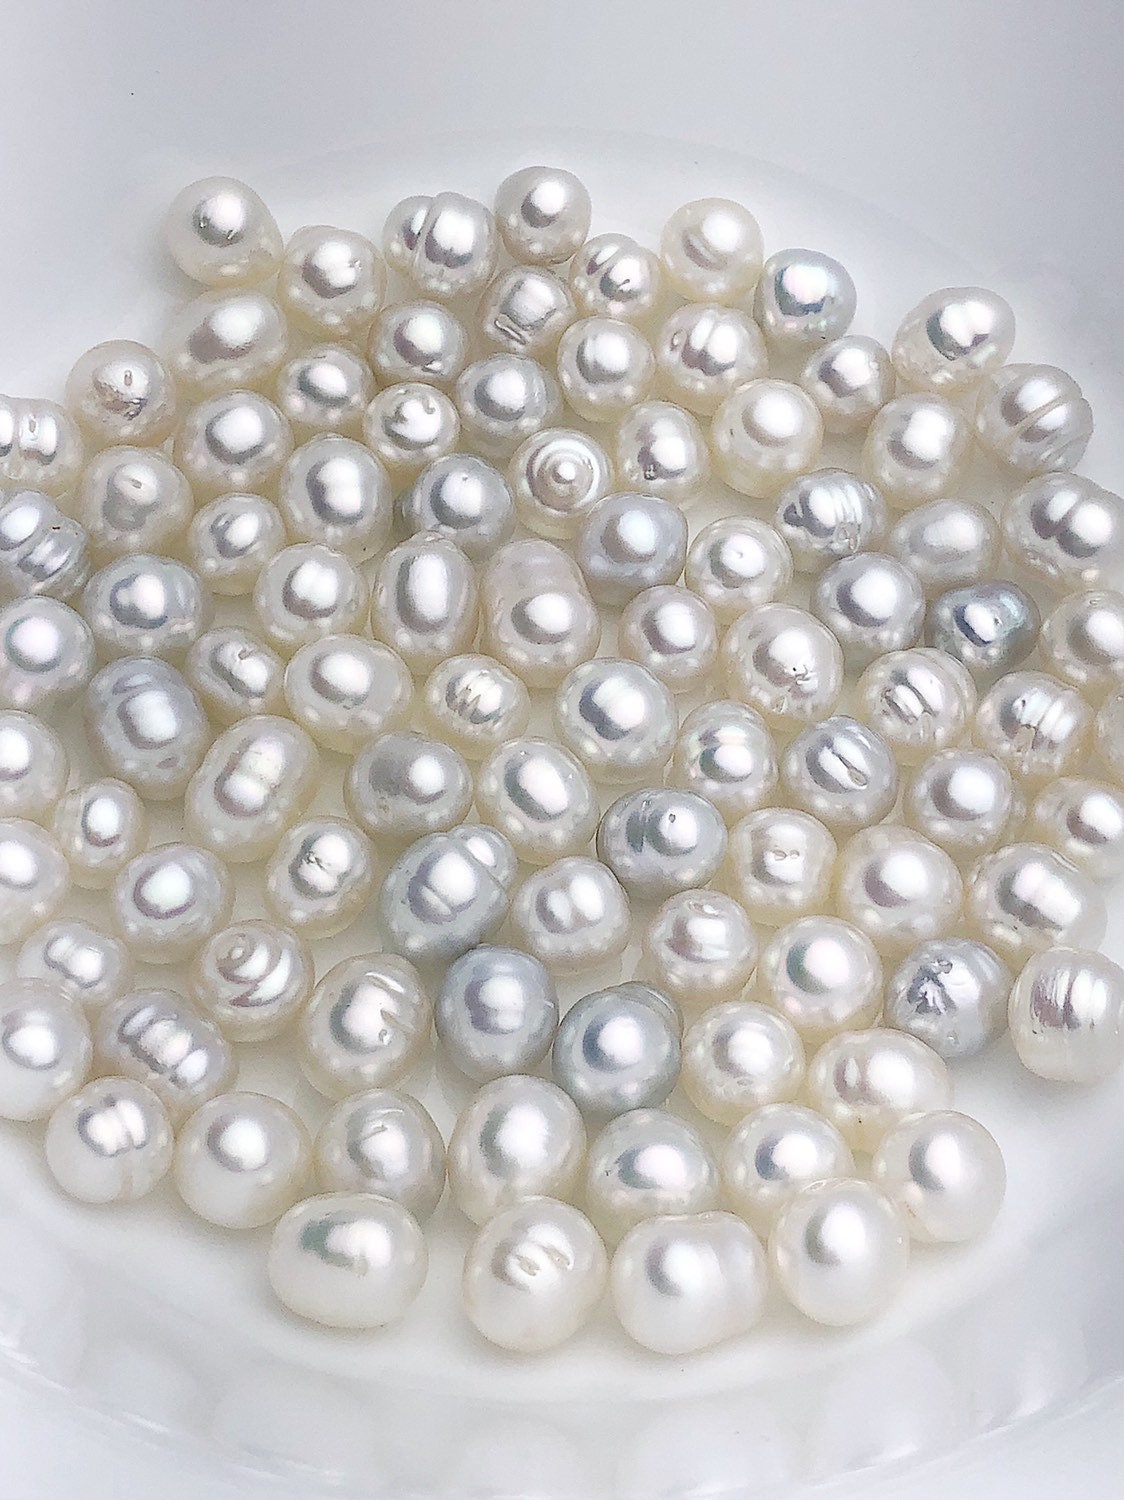 10-19mm White South Sea Loose Pearls, Drops, 10mm 19mm, AA Quality 946 